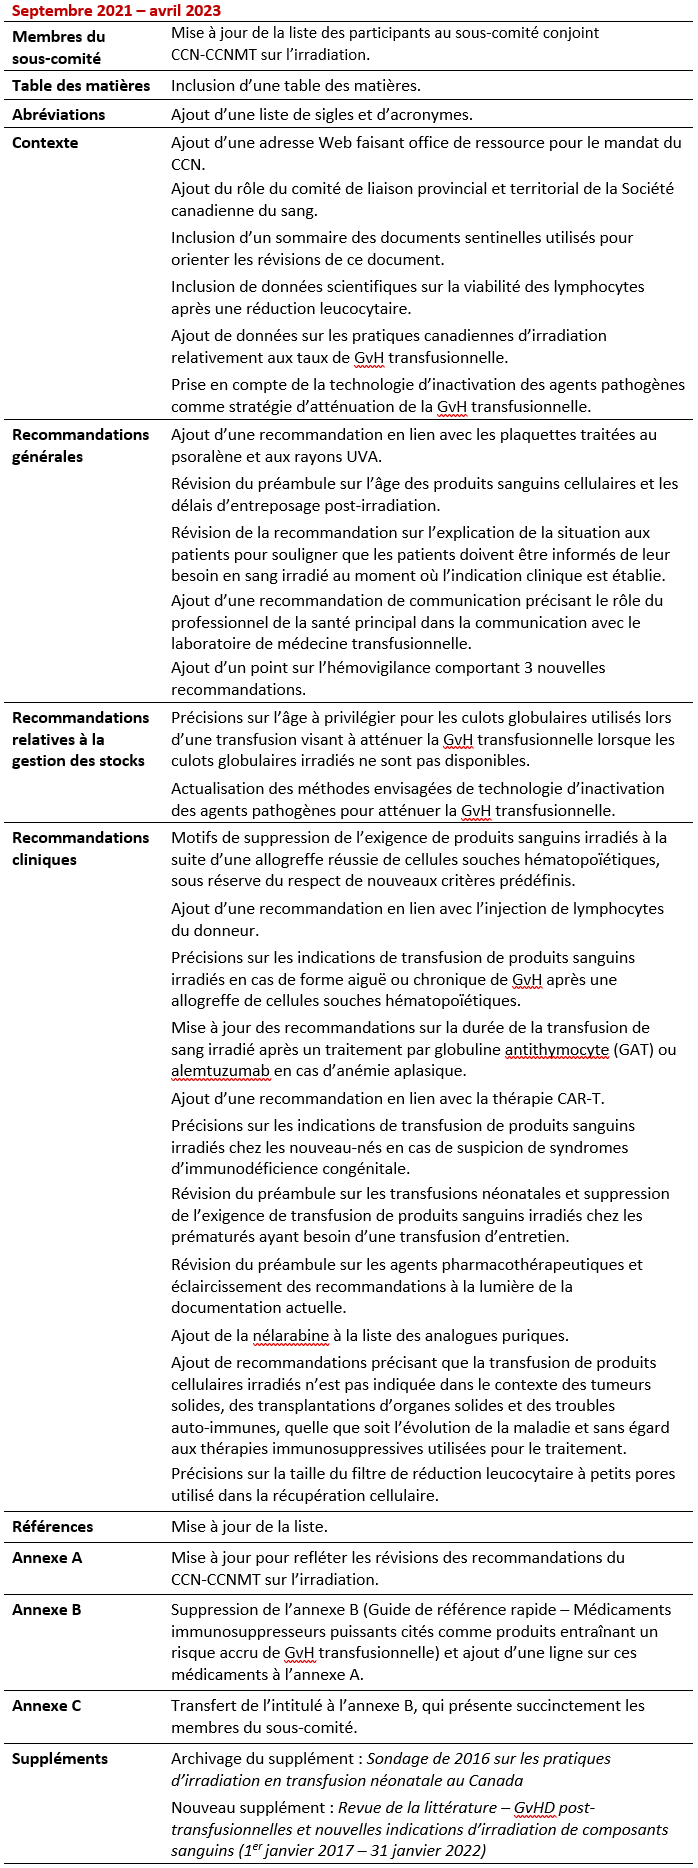 2023-10-26 Irradiation Recommendations - 2023 Revisions_FR.png